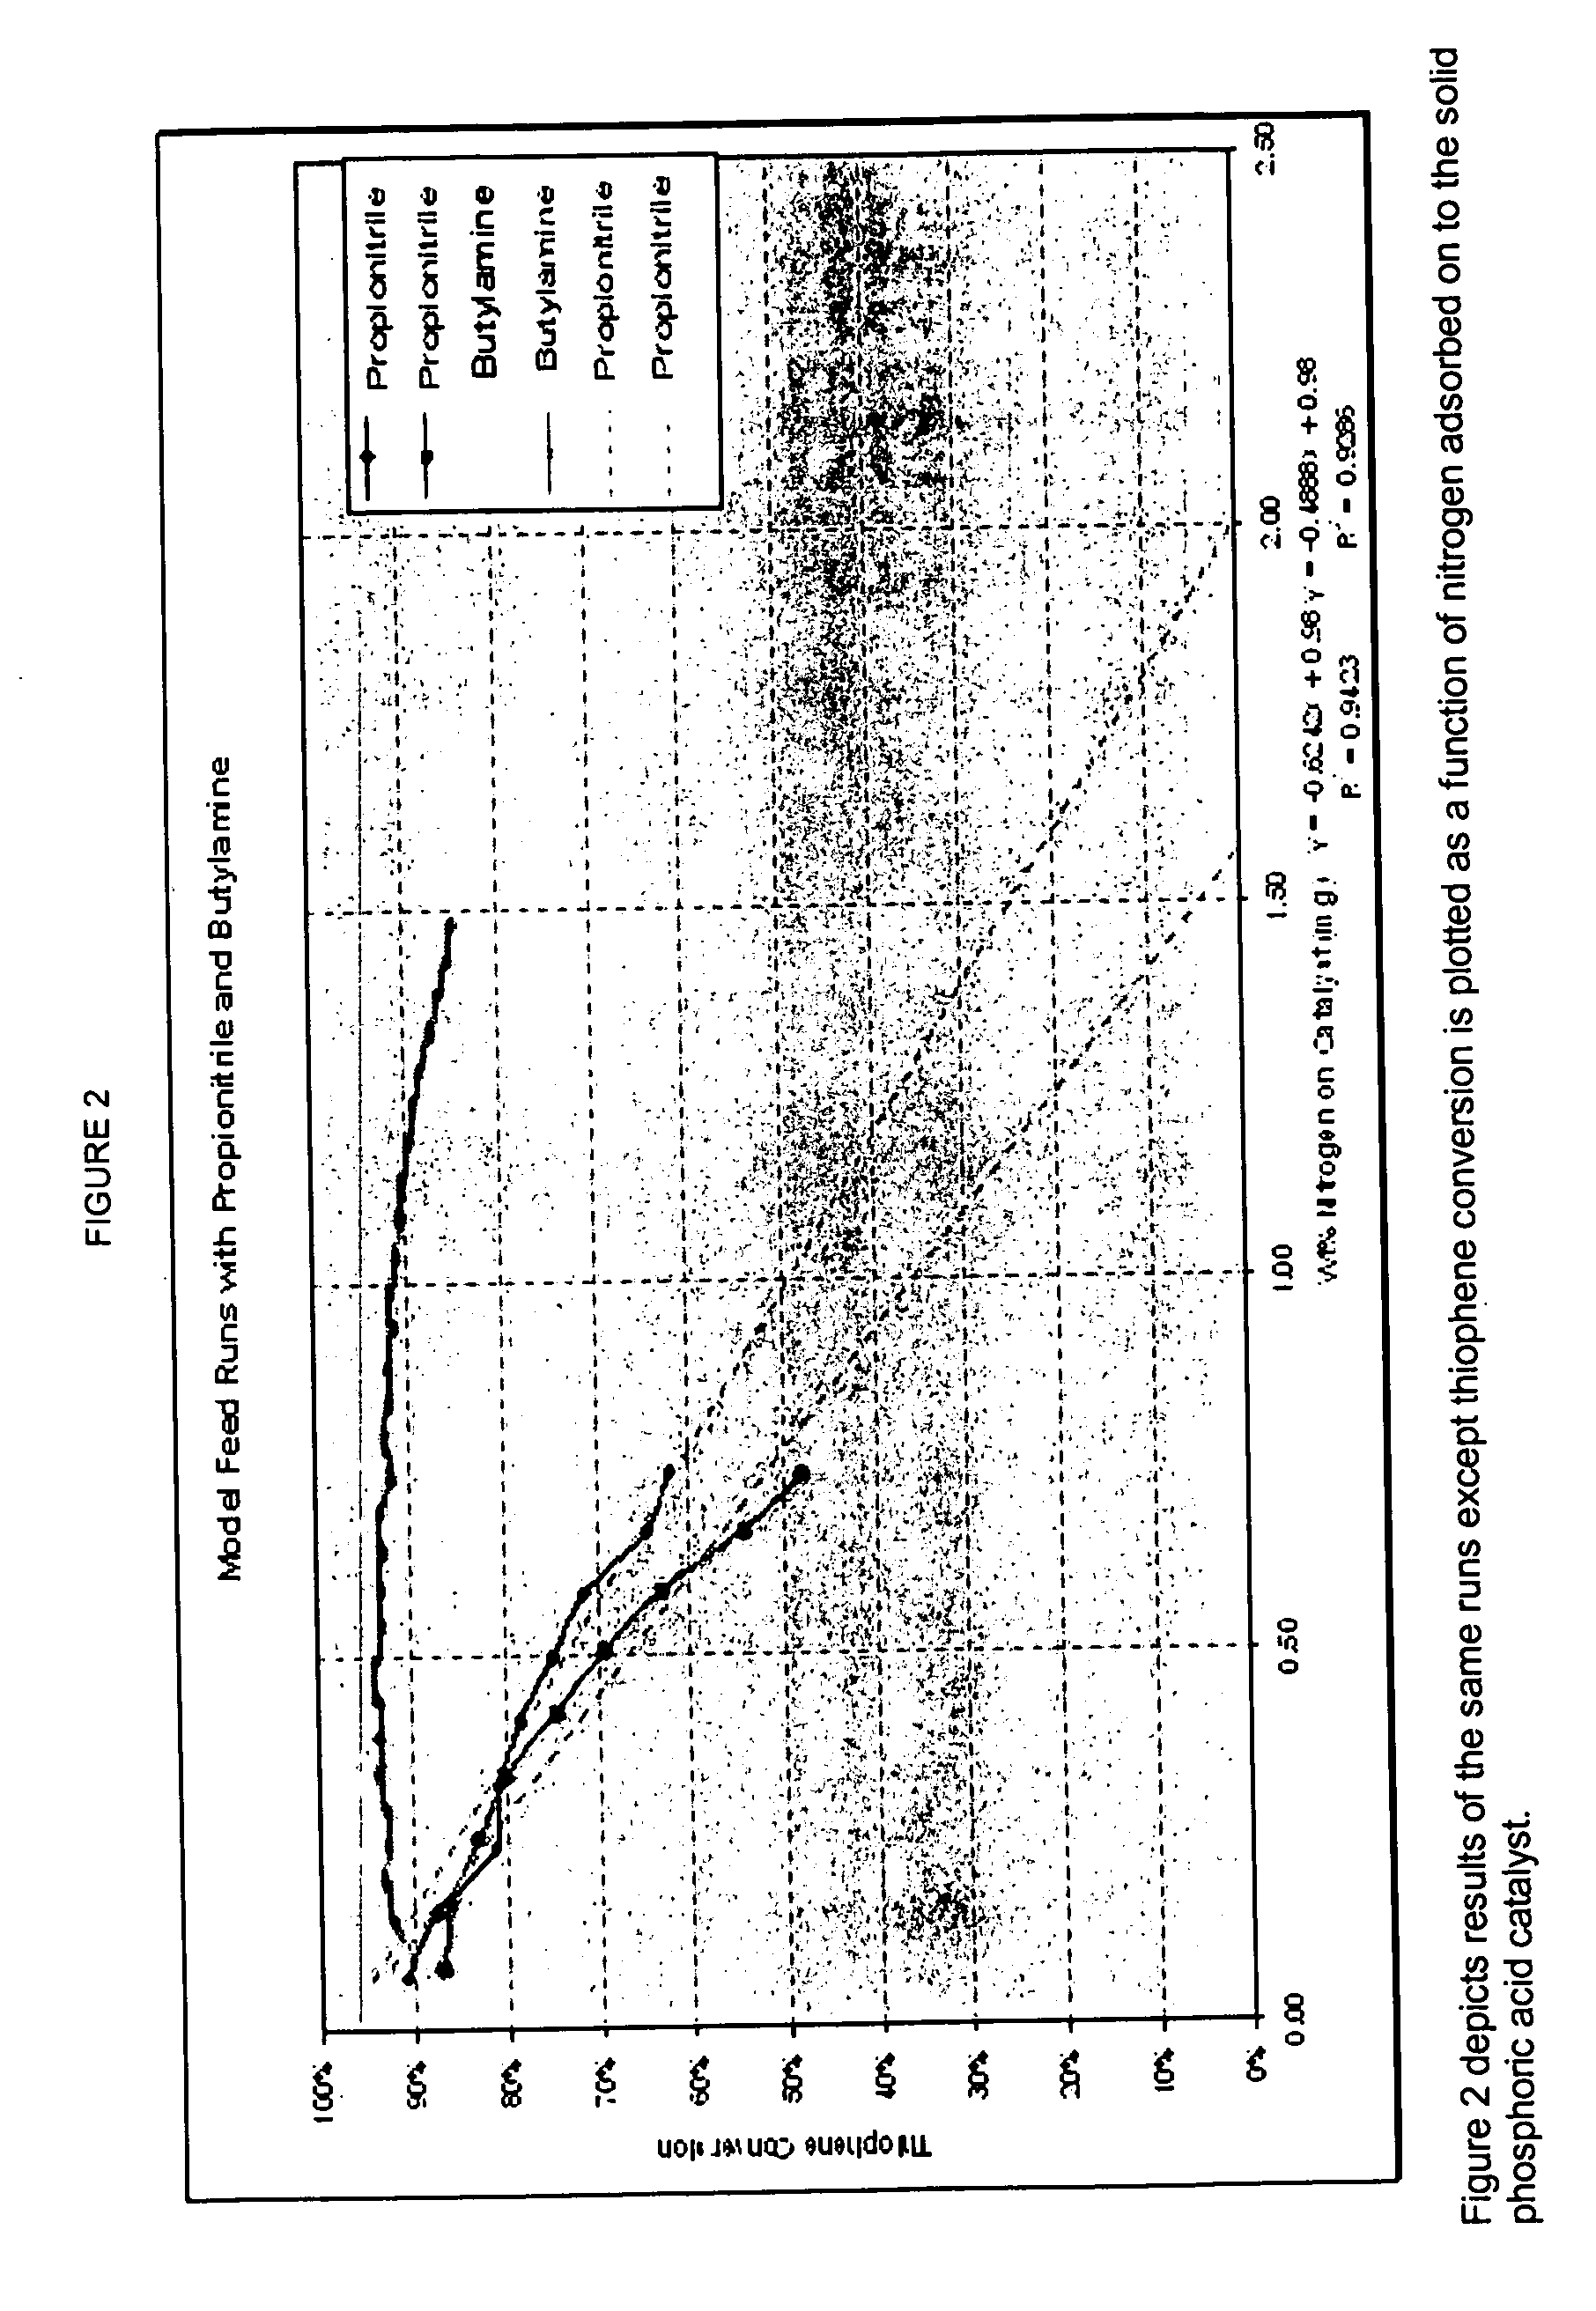 Process for removal of sulfur from components for blending of transportation fuels